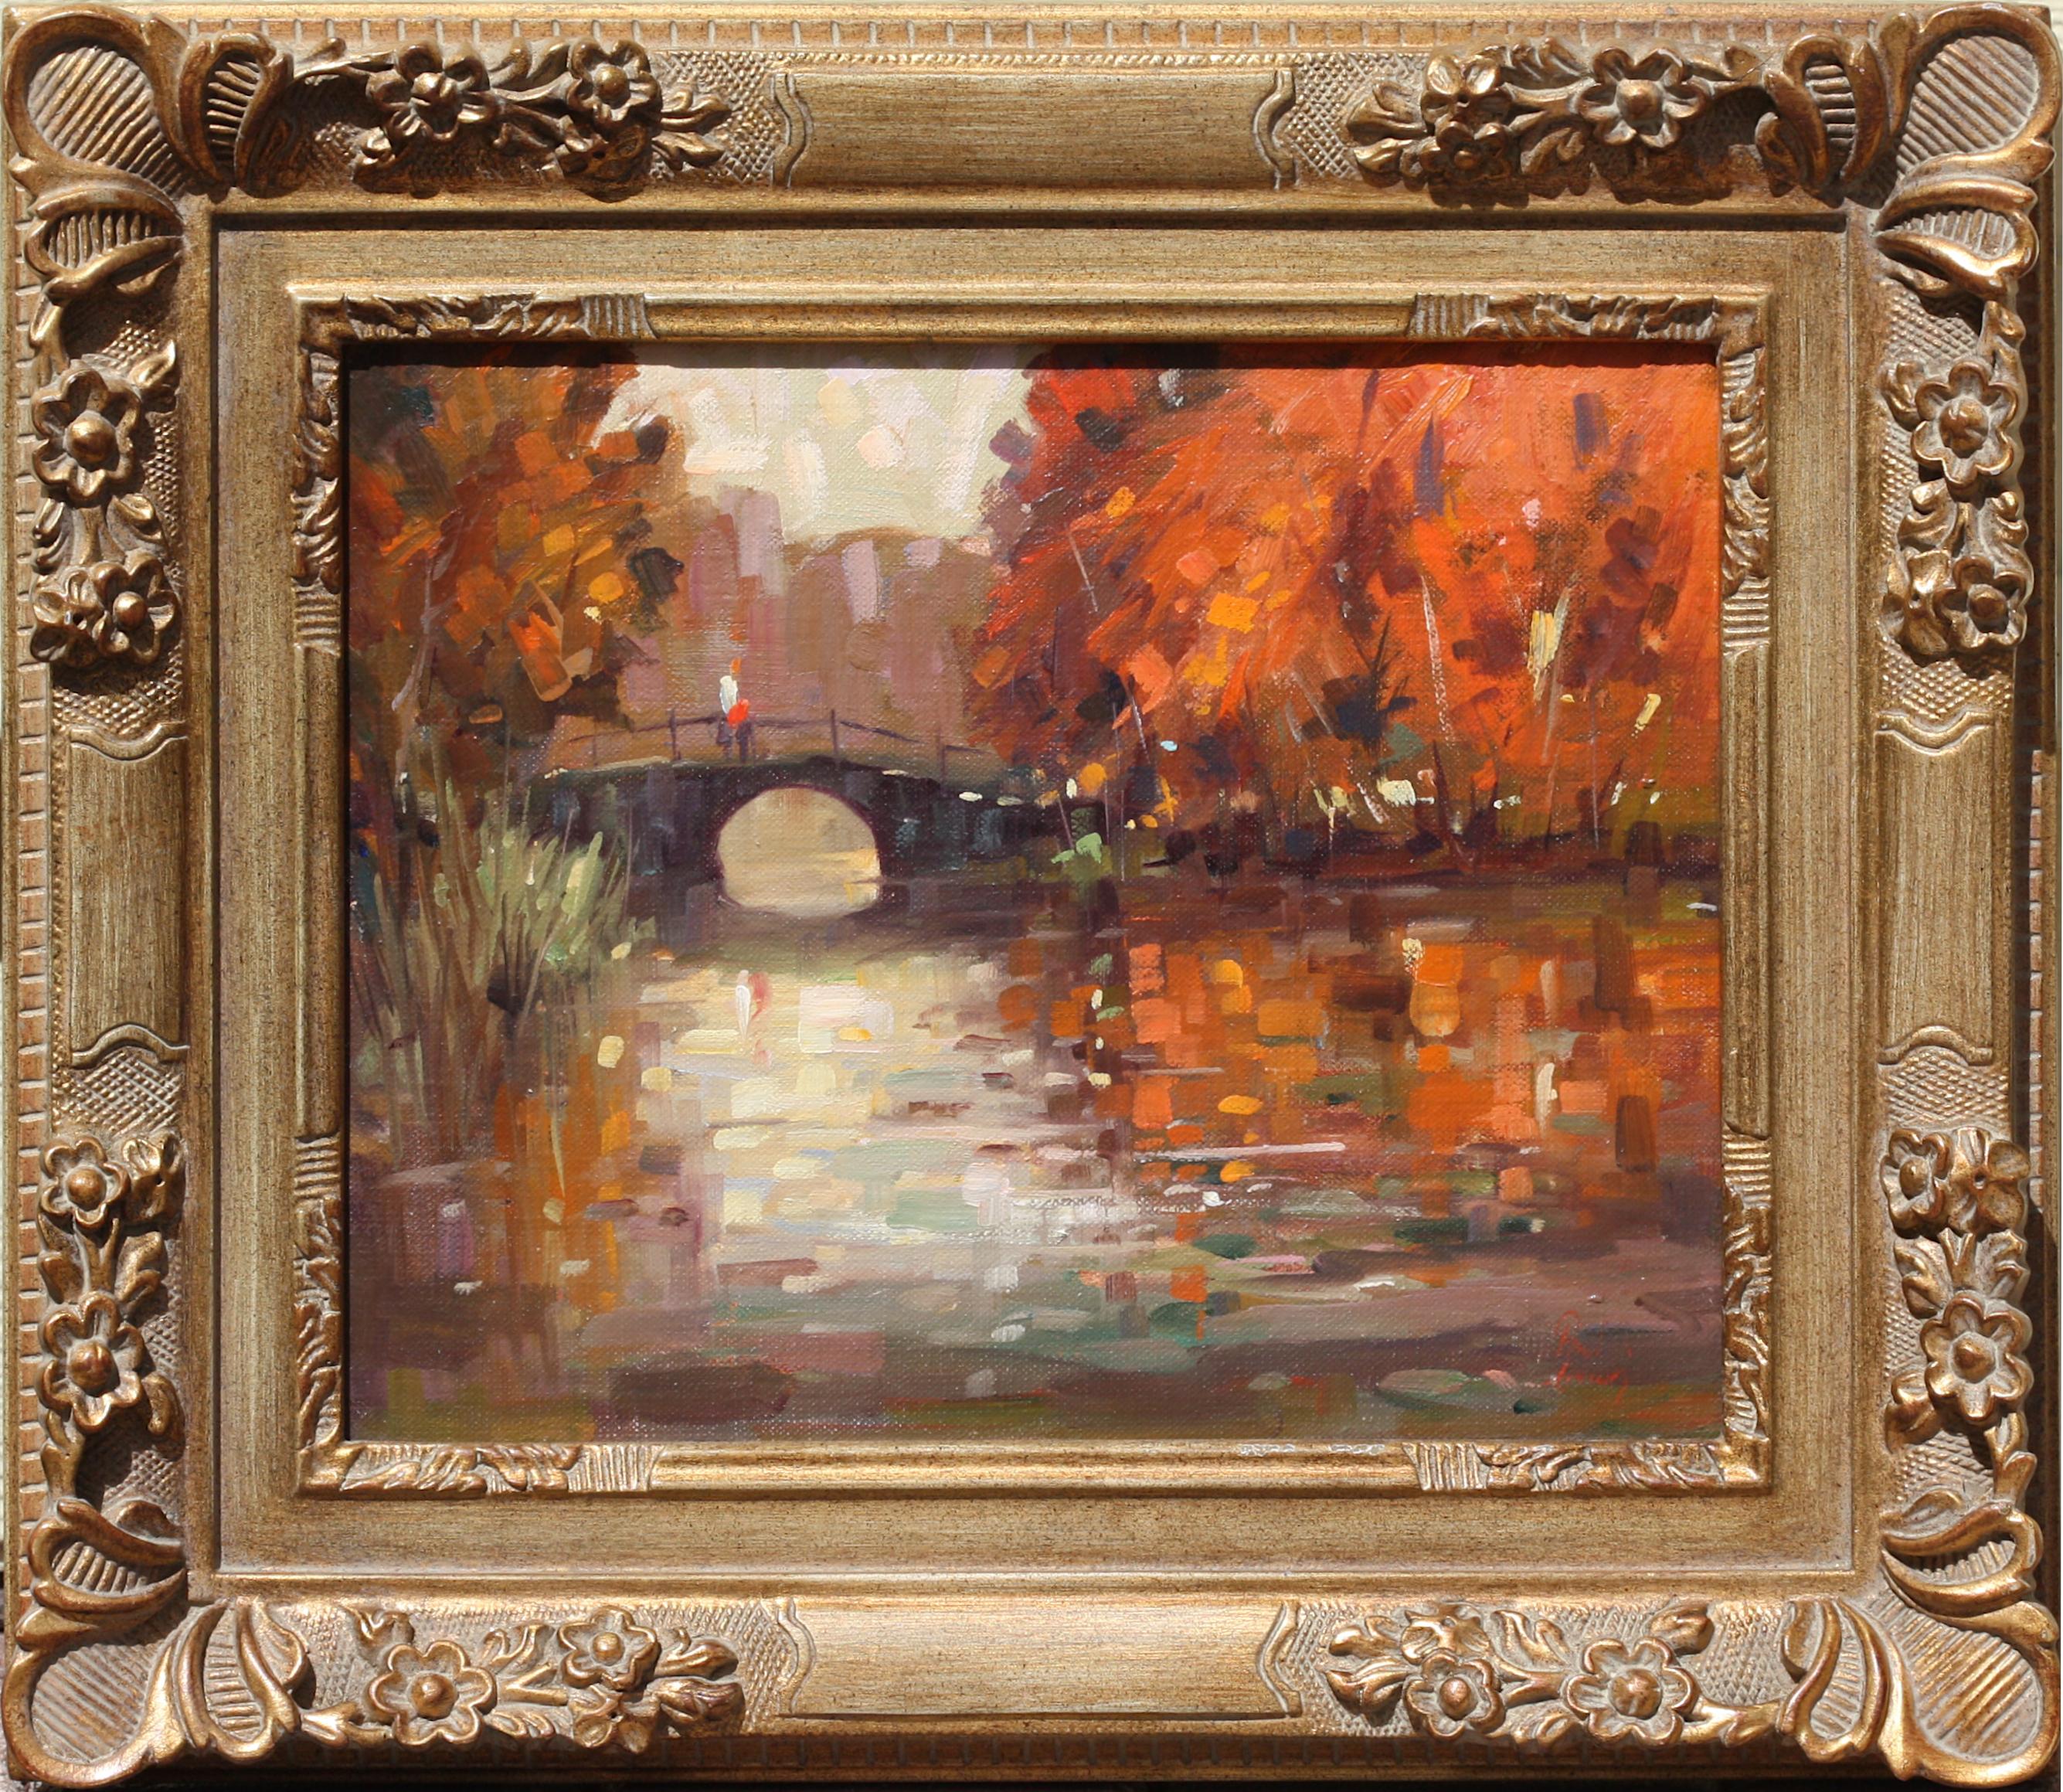 
American/British School, 20th Century, Autumn Landscape
signed indistinctly, oil on canvas
7.75 by 10 in. (19.65 by 25.4 cm.), overall, 12 by 14 in. (30.48 by 35.56 cm.)
